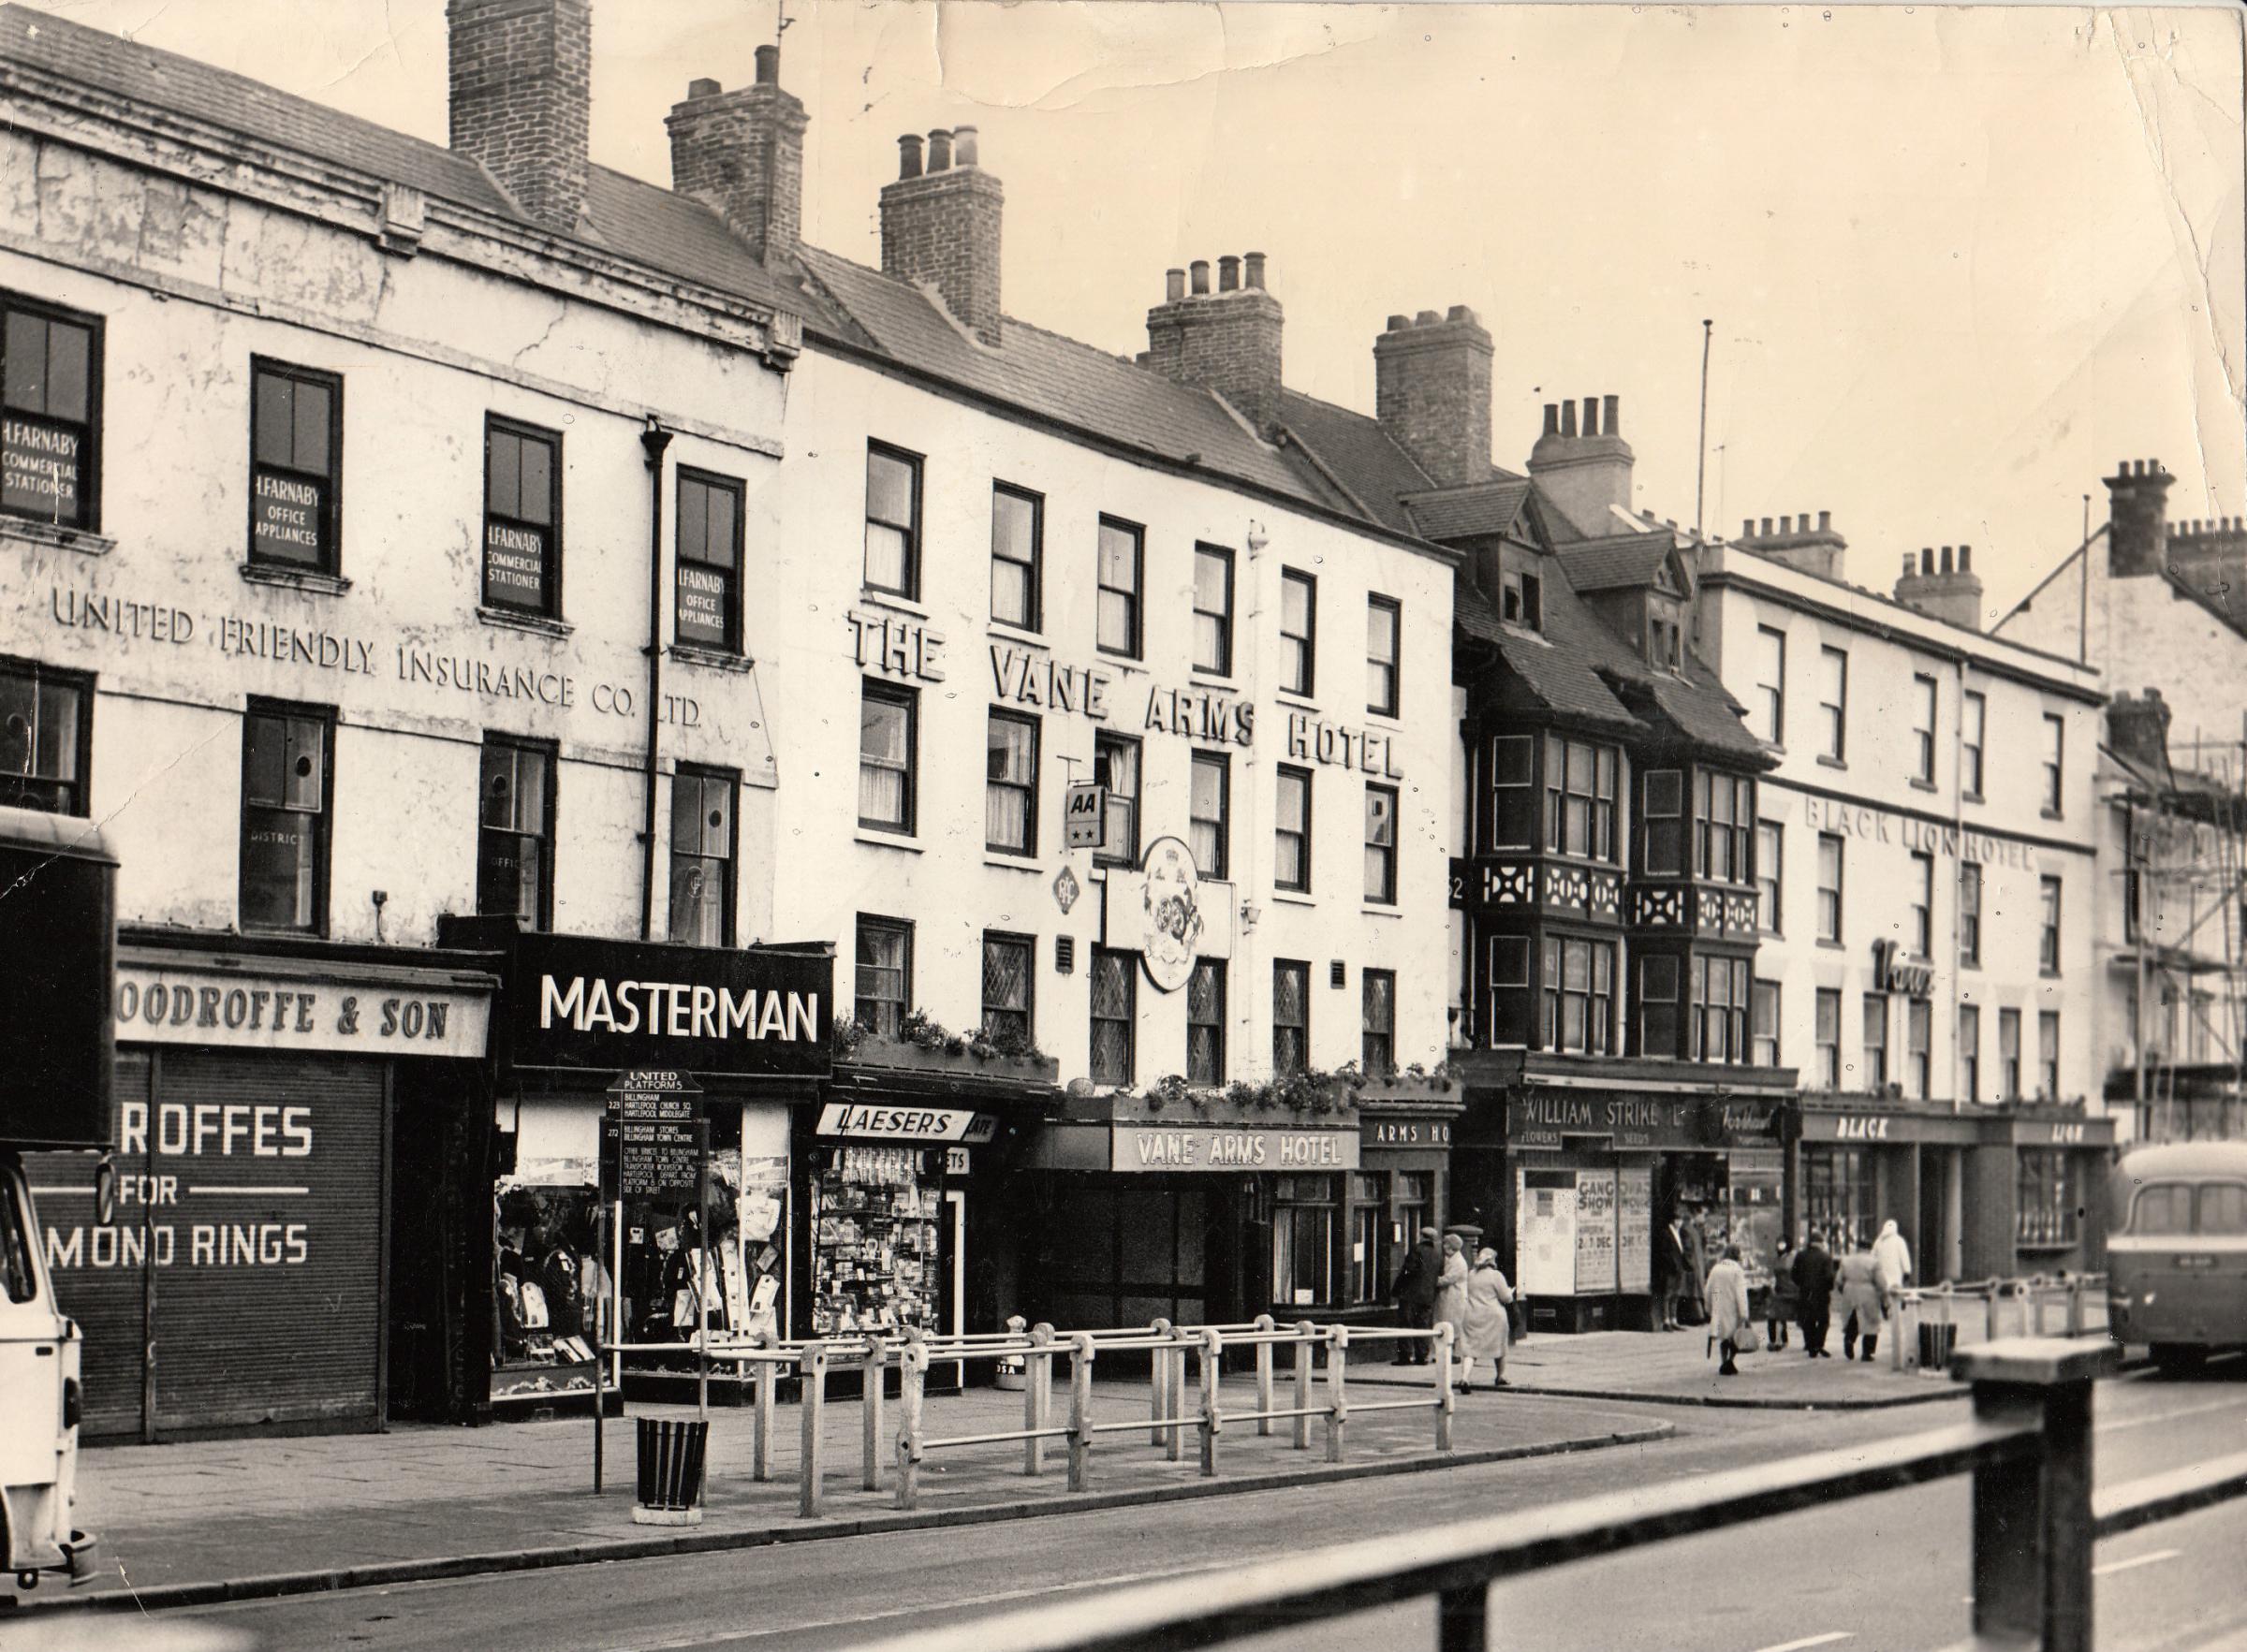 The Black Lion Hotel, on the right, was on the east side of Stockton High Street and was demolished in 1969. Here 300 railway navvies enjoyed free bread, cheese and beer after the first rail was alid 200 years ago